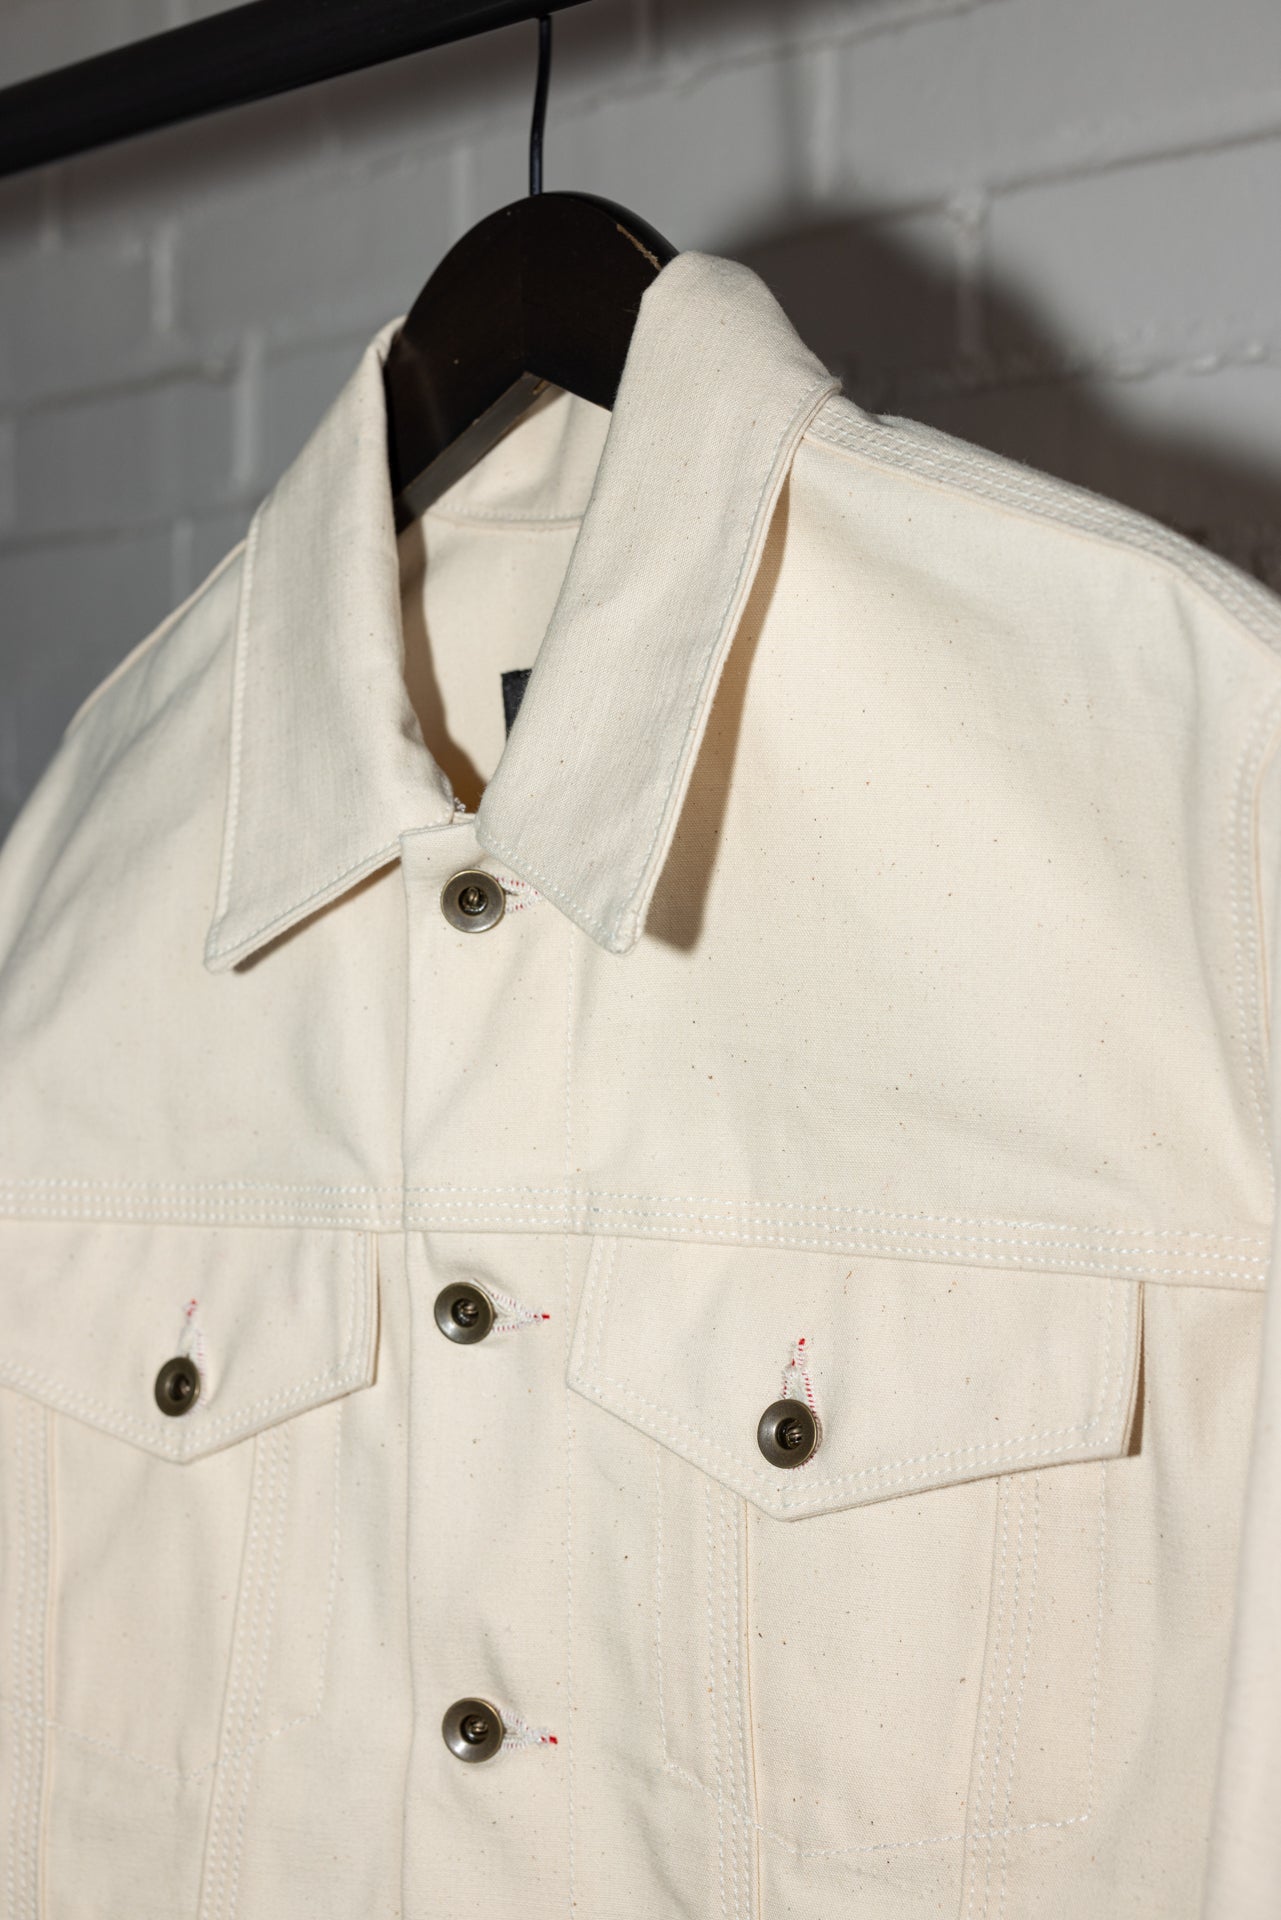 angle: Denim Jacket Natural Canvas Selvage  Raleigh Workshop denim jacket in  natural canvas selvage white 